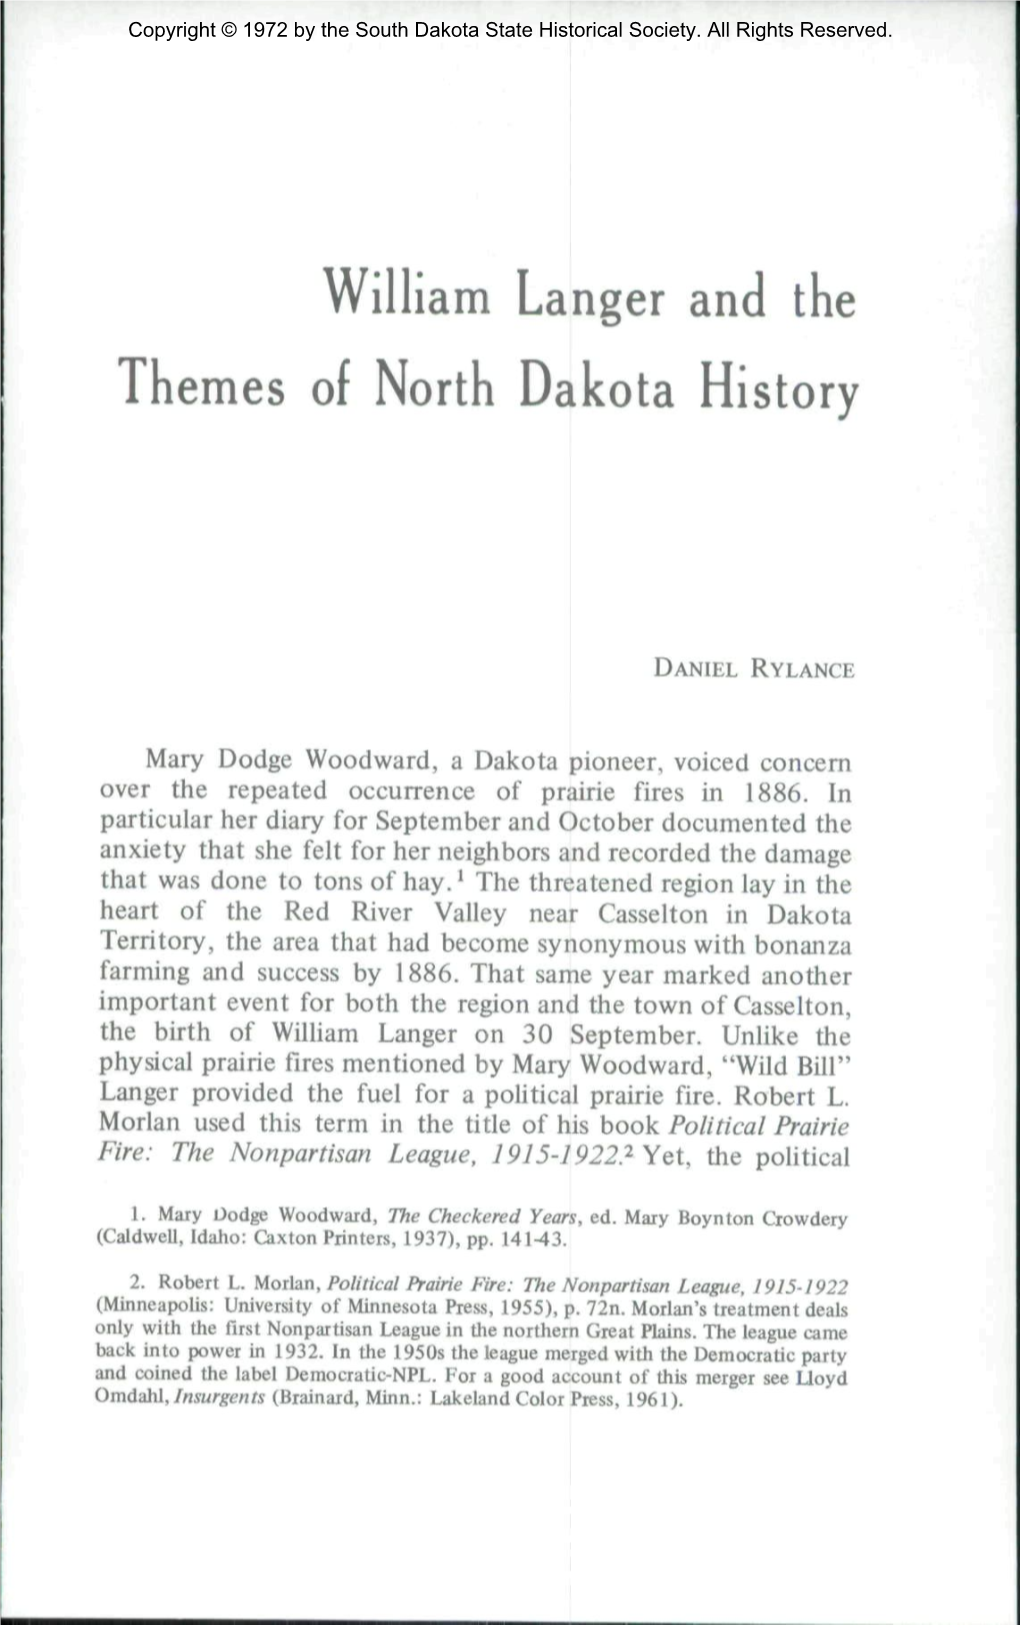 William Langer and the Themes of North Dakota History